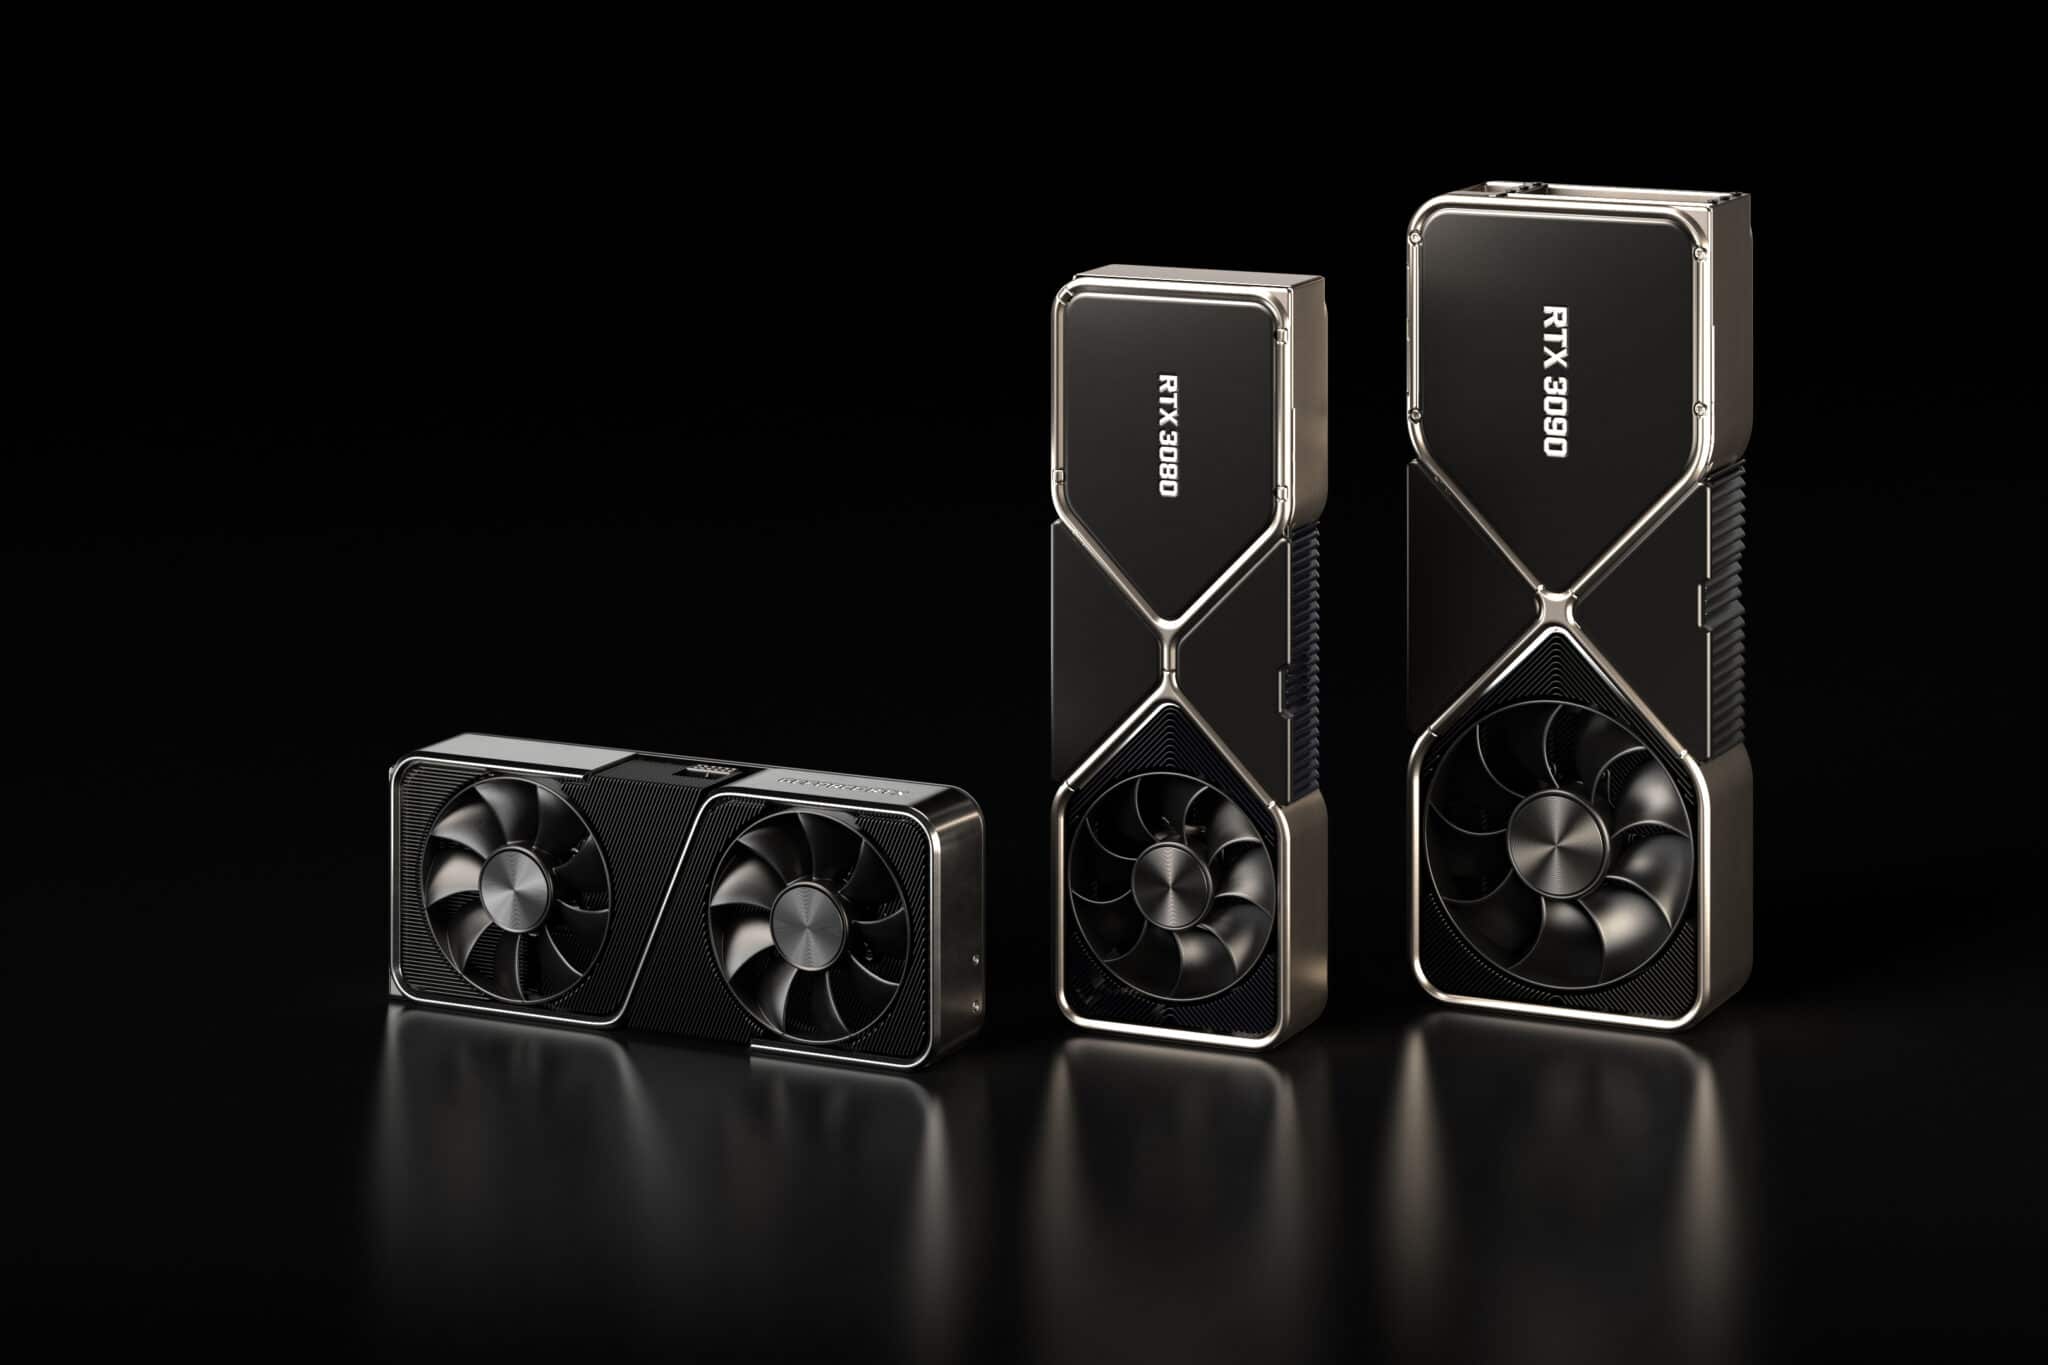 The NVIDIA RTX 3090 is Here, and it’s already Gone